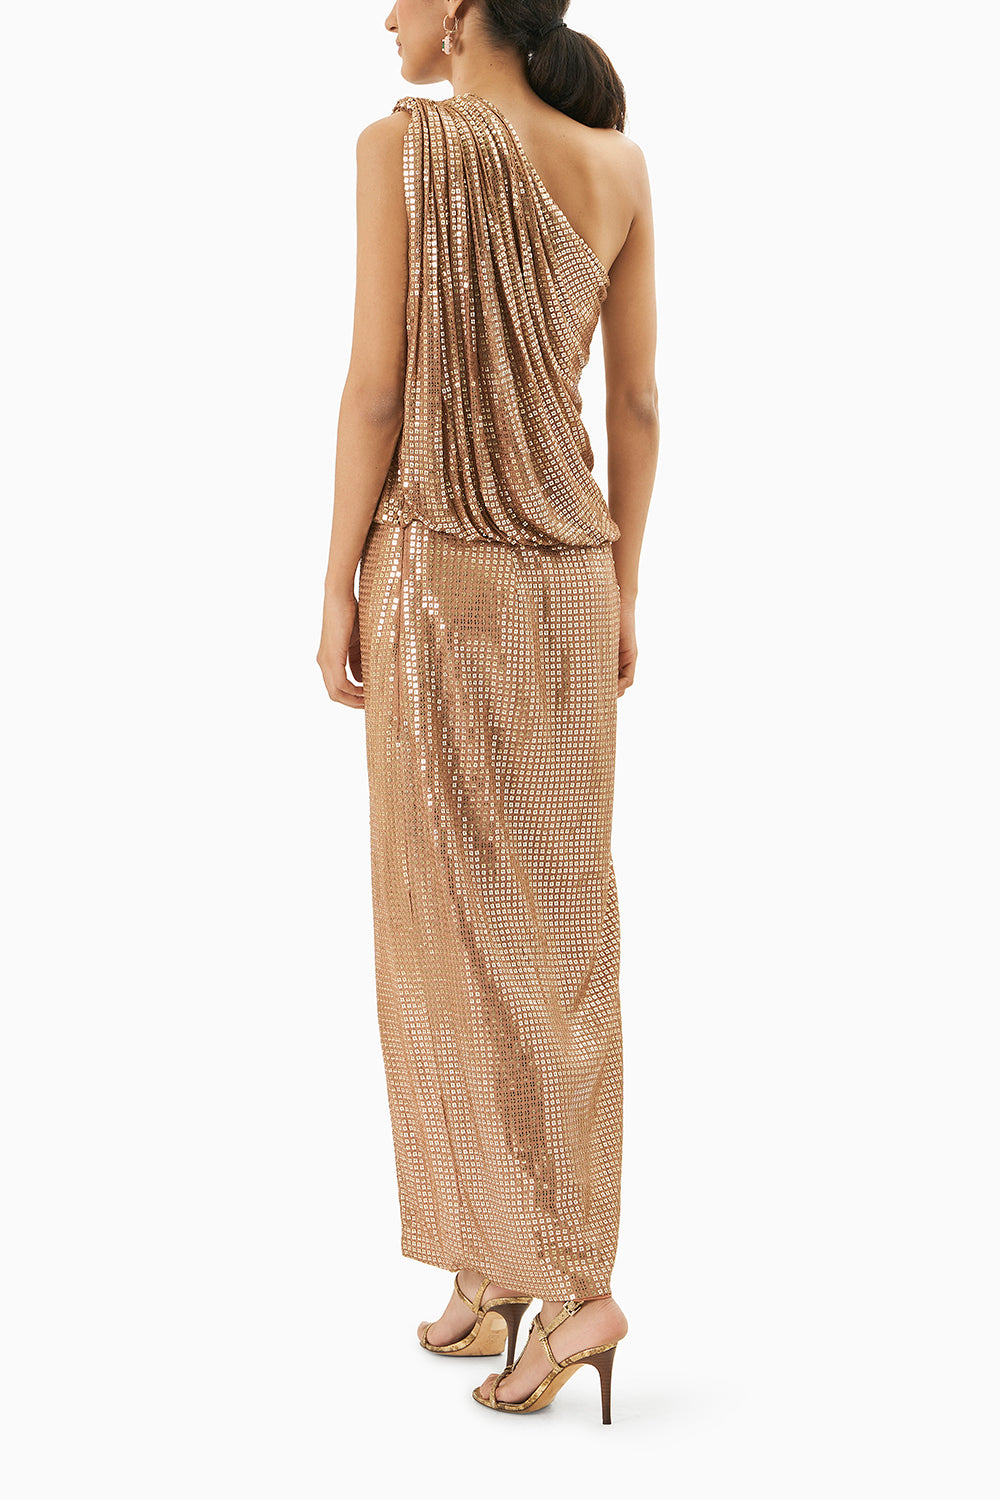 One Shoulder Knotted Sequined Dress